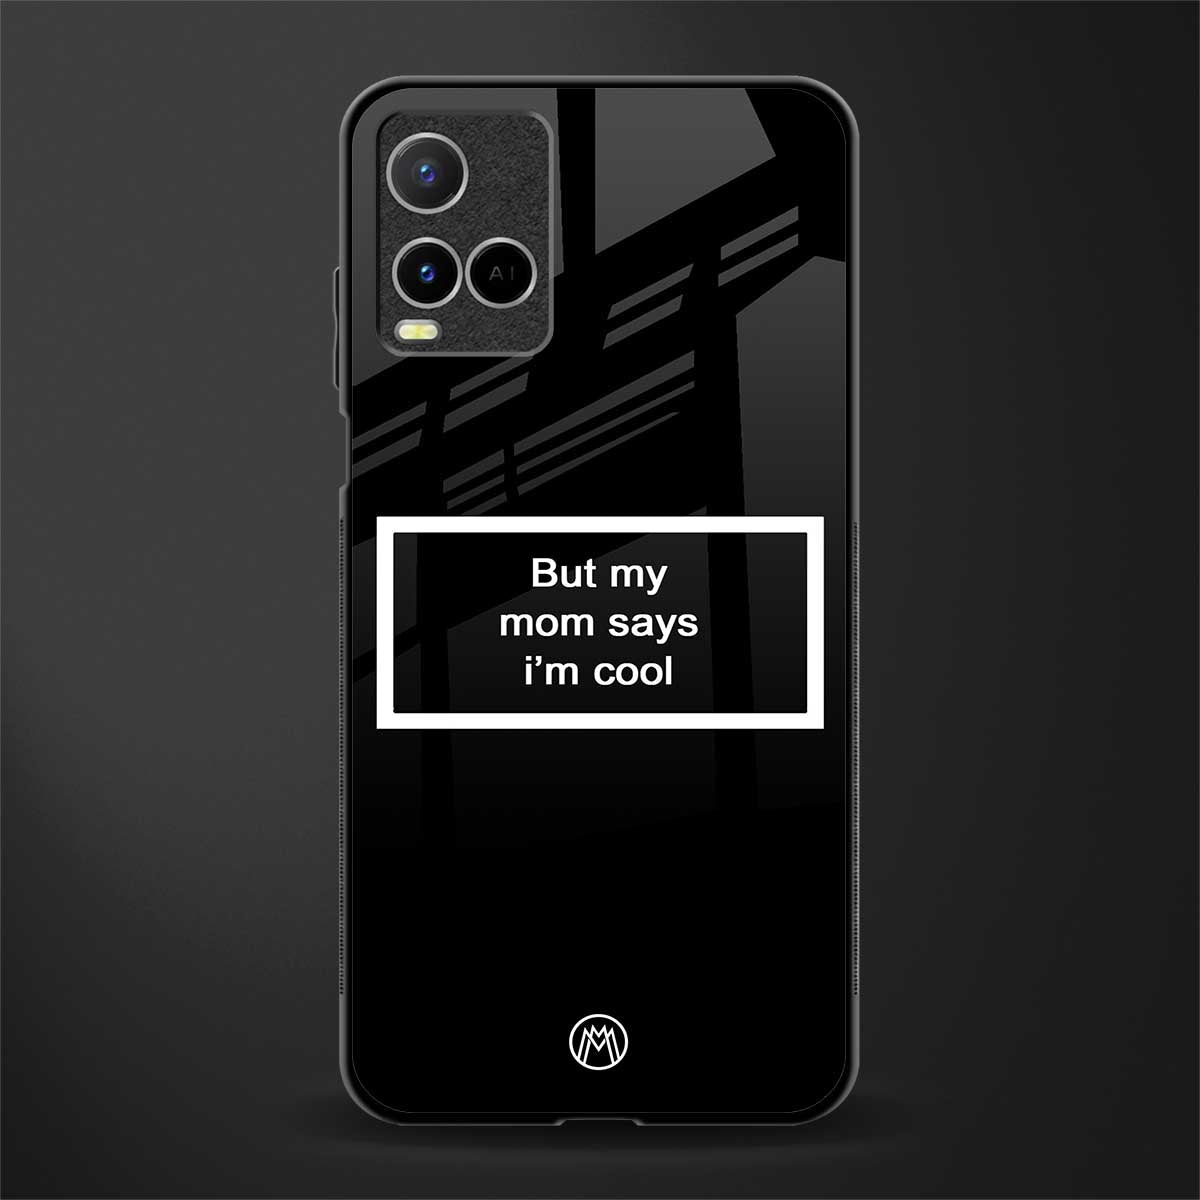 mom says i'm cool black glass case for vivo y21s image